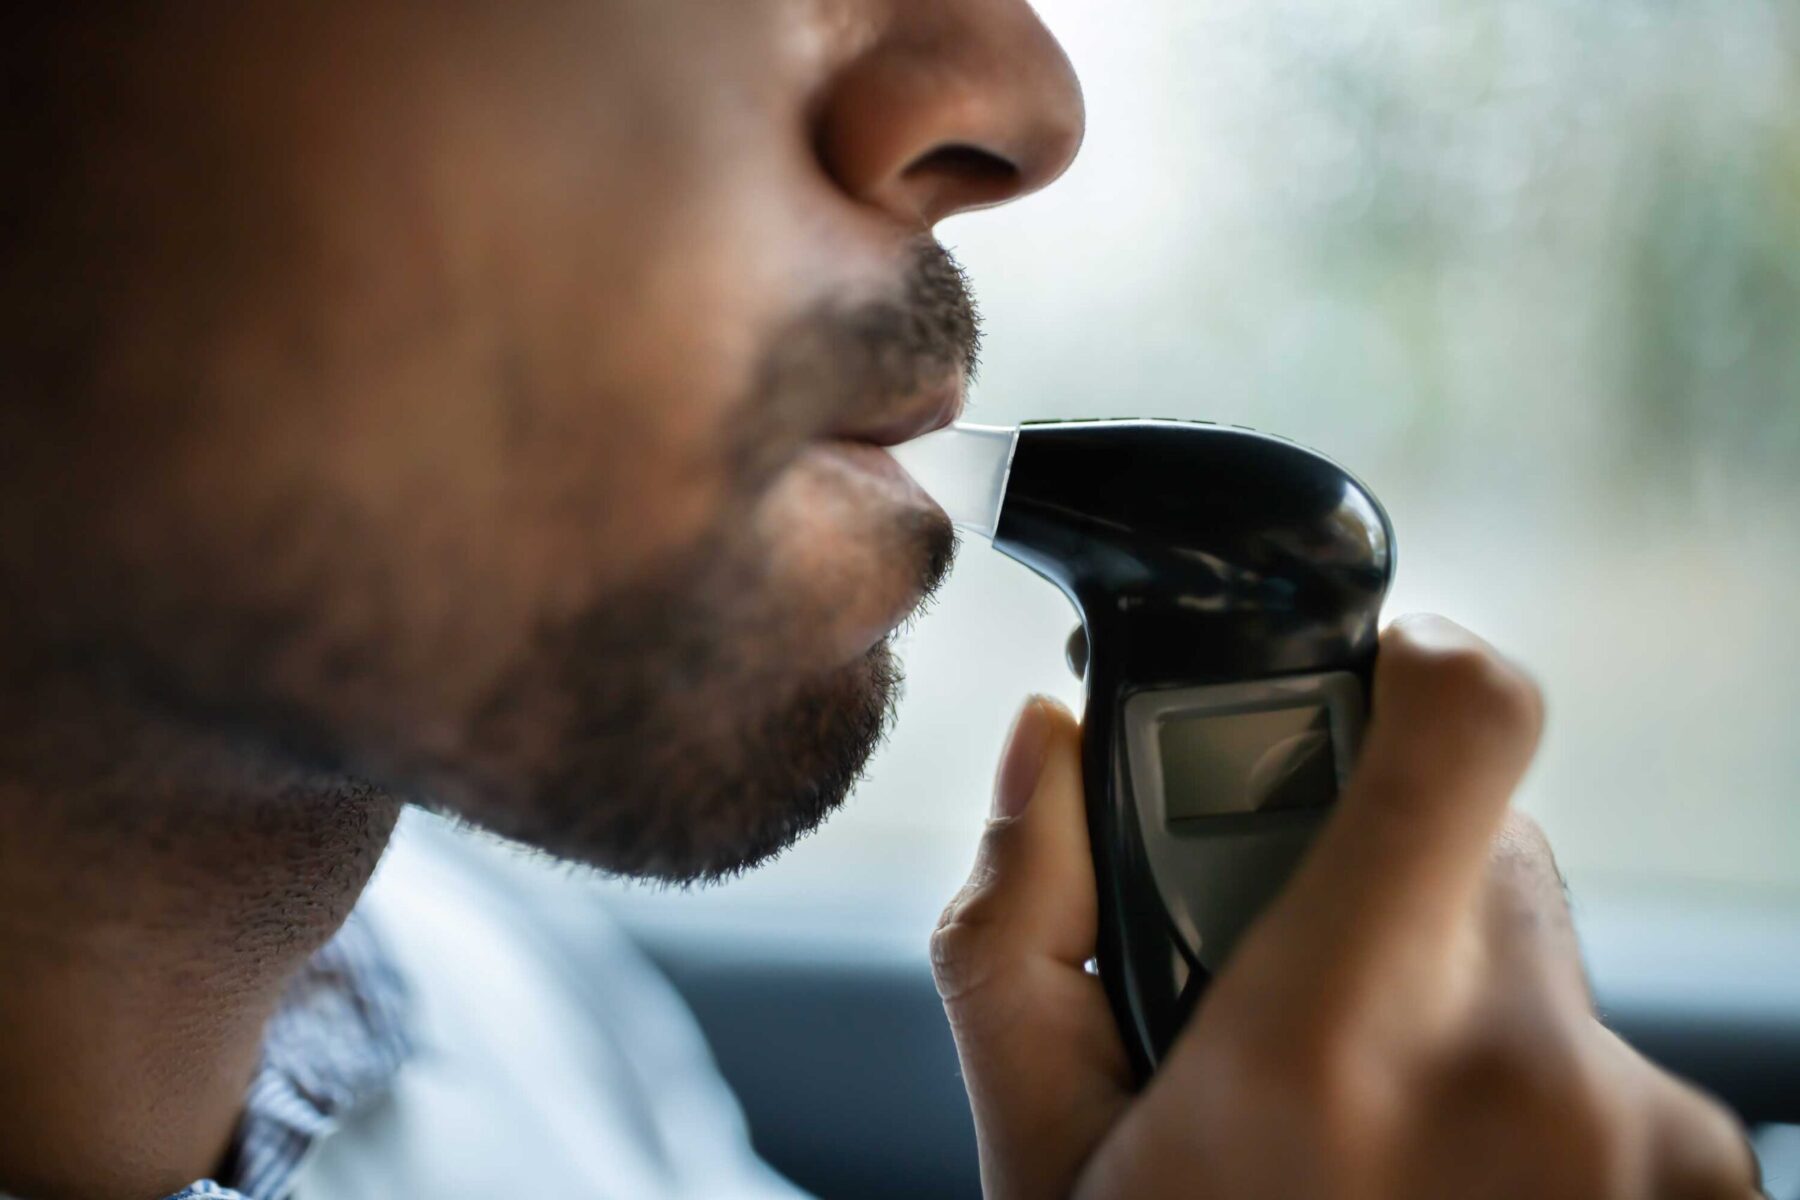 Man blowing into a breathalyzer to rest for drunk driving